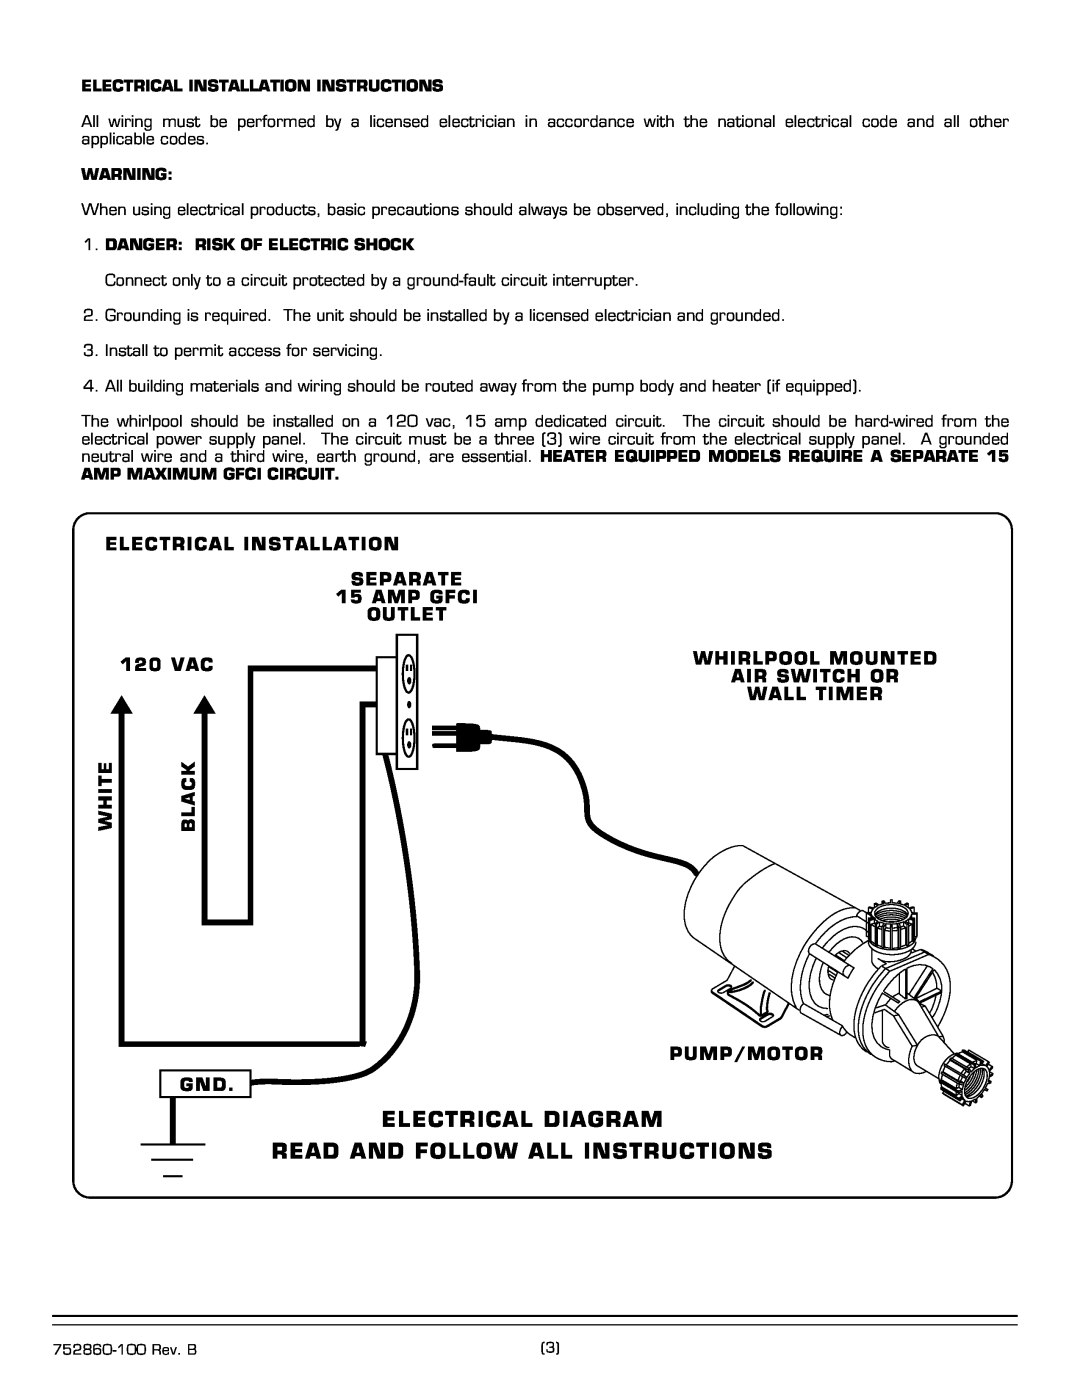 American Standard 2771E Electrical Diagram, Read And Follow All Instructions, Electrical Installation Instructions 